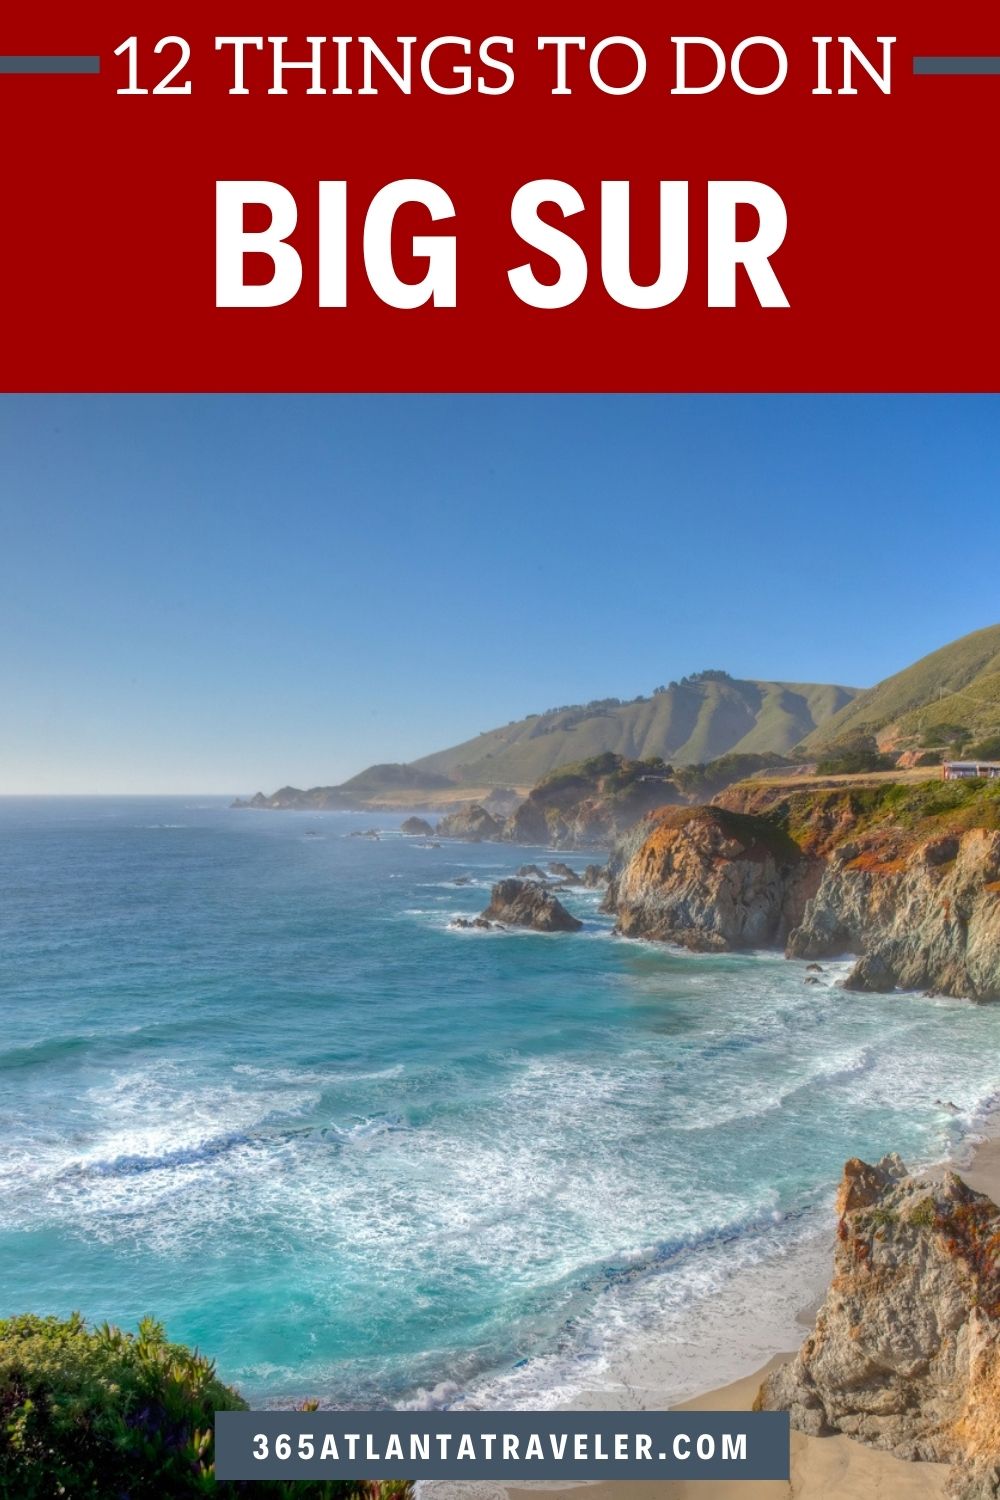 12 OF THE ABSOLUTE BEST THINGS TO DO IN BIG SUR